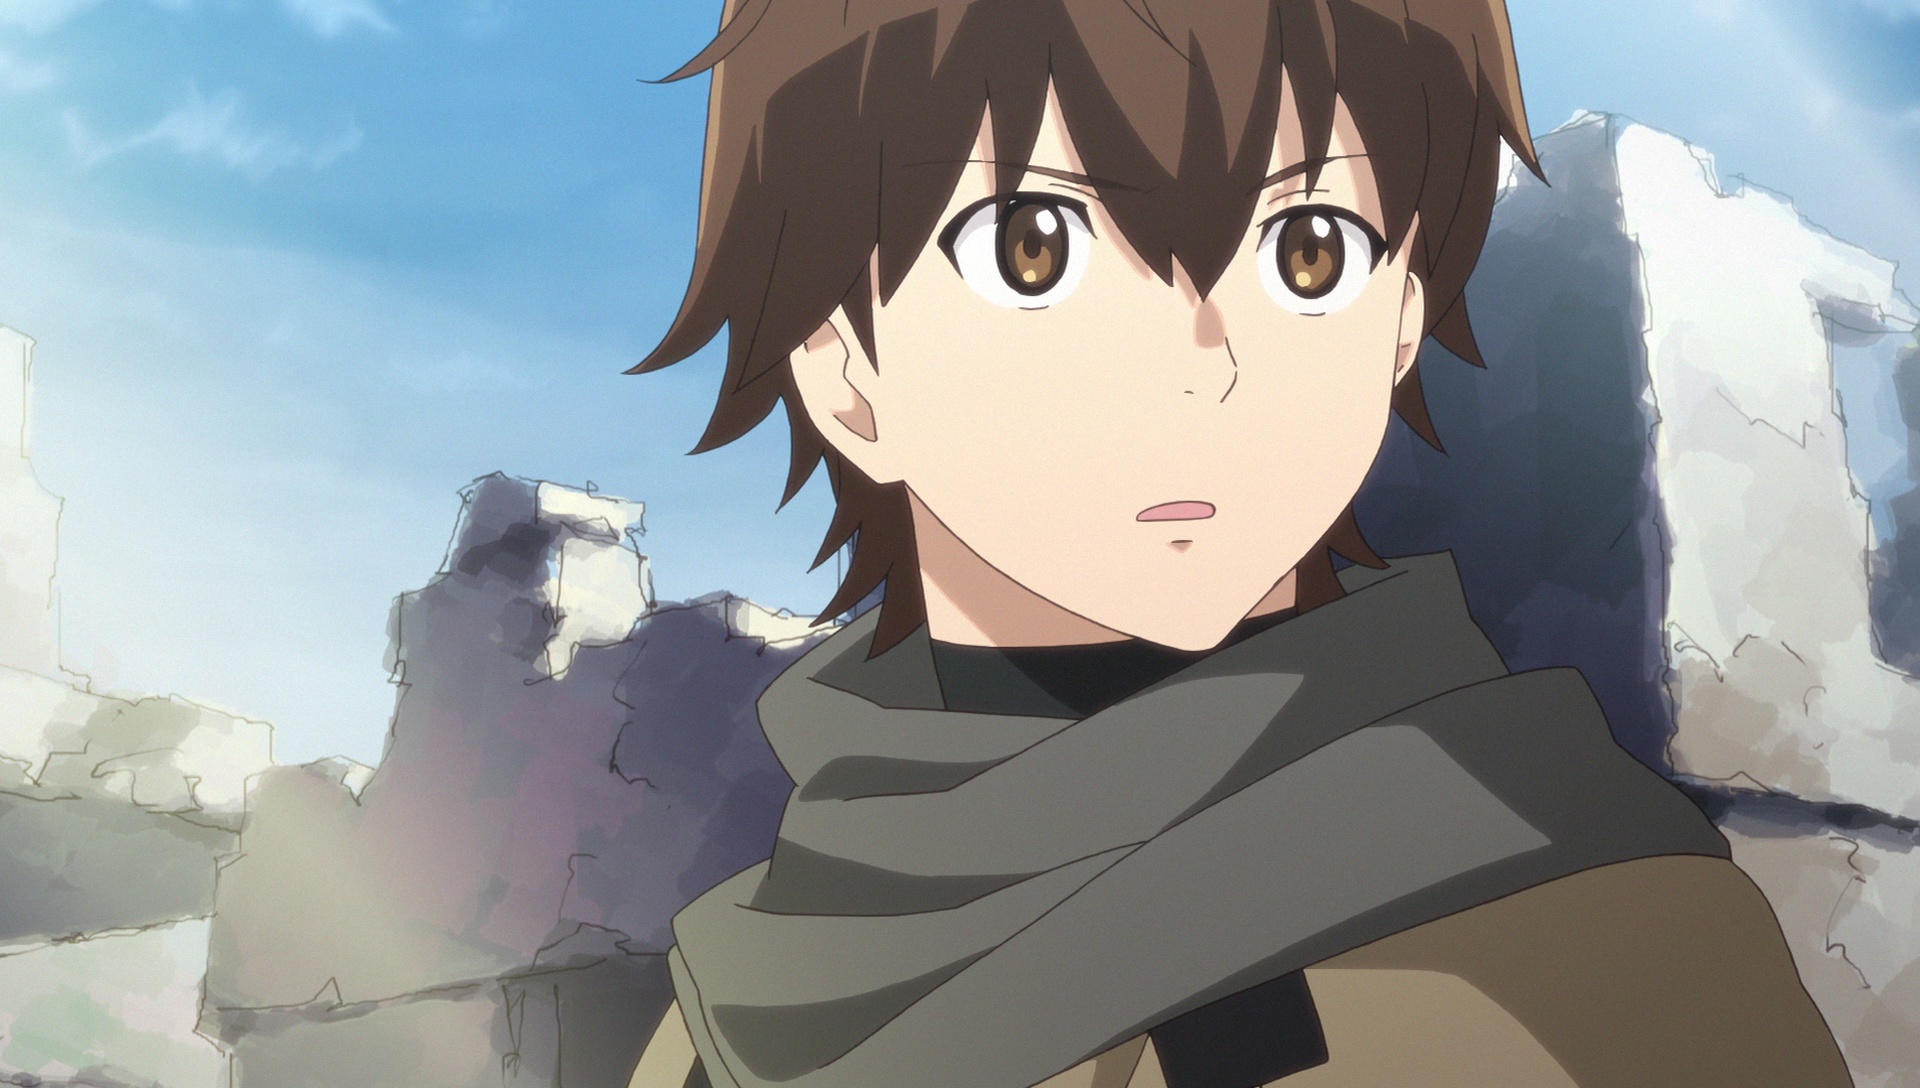 grimgar ashes and illusions episode 1